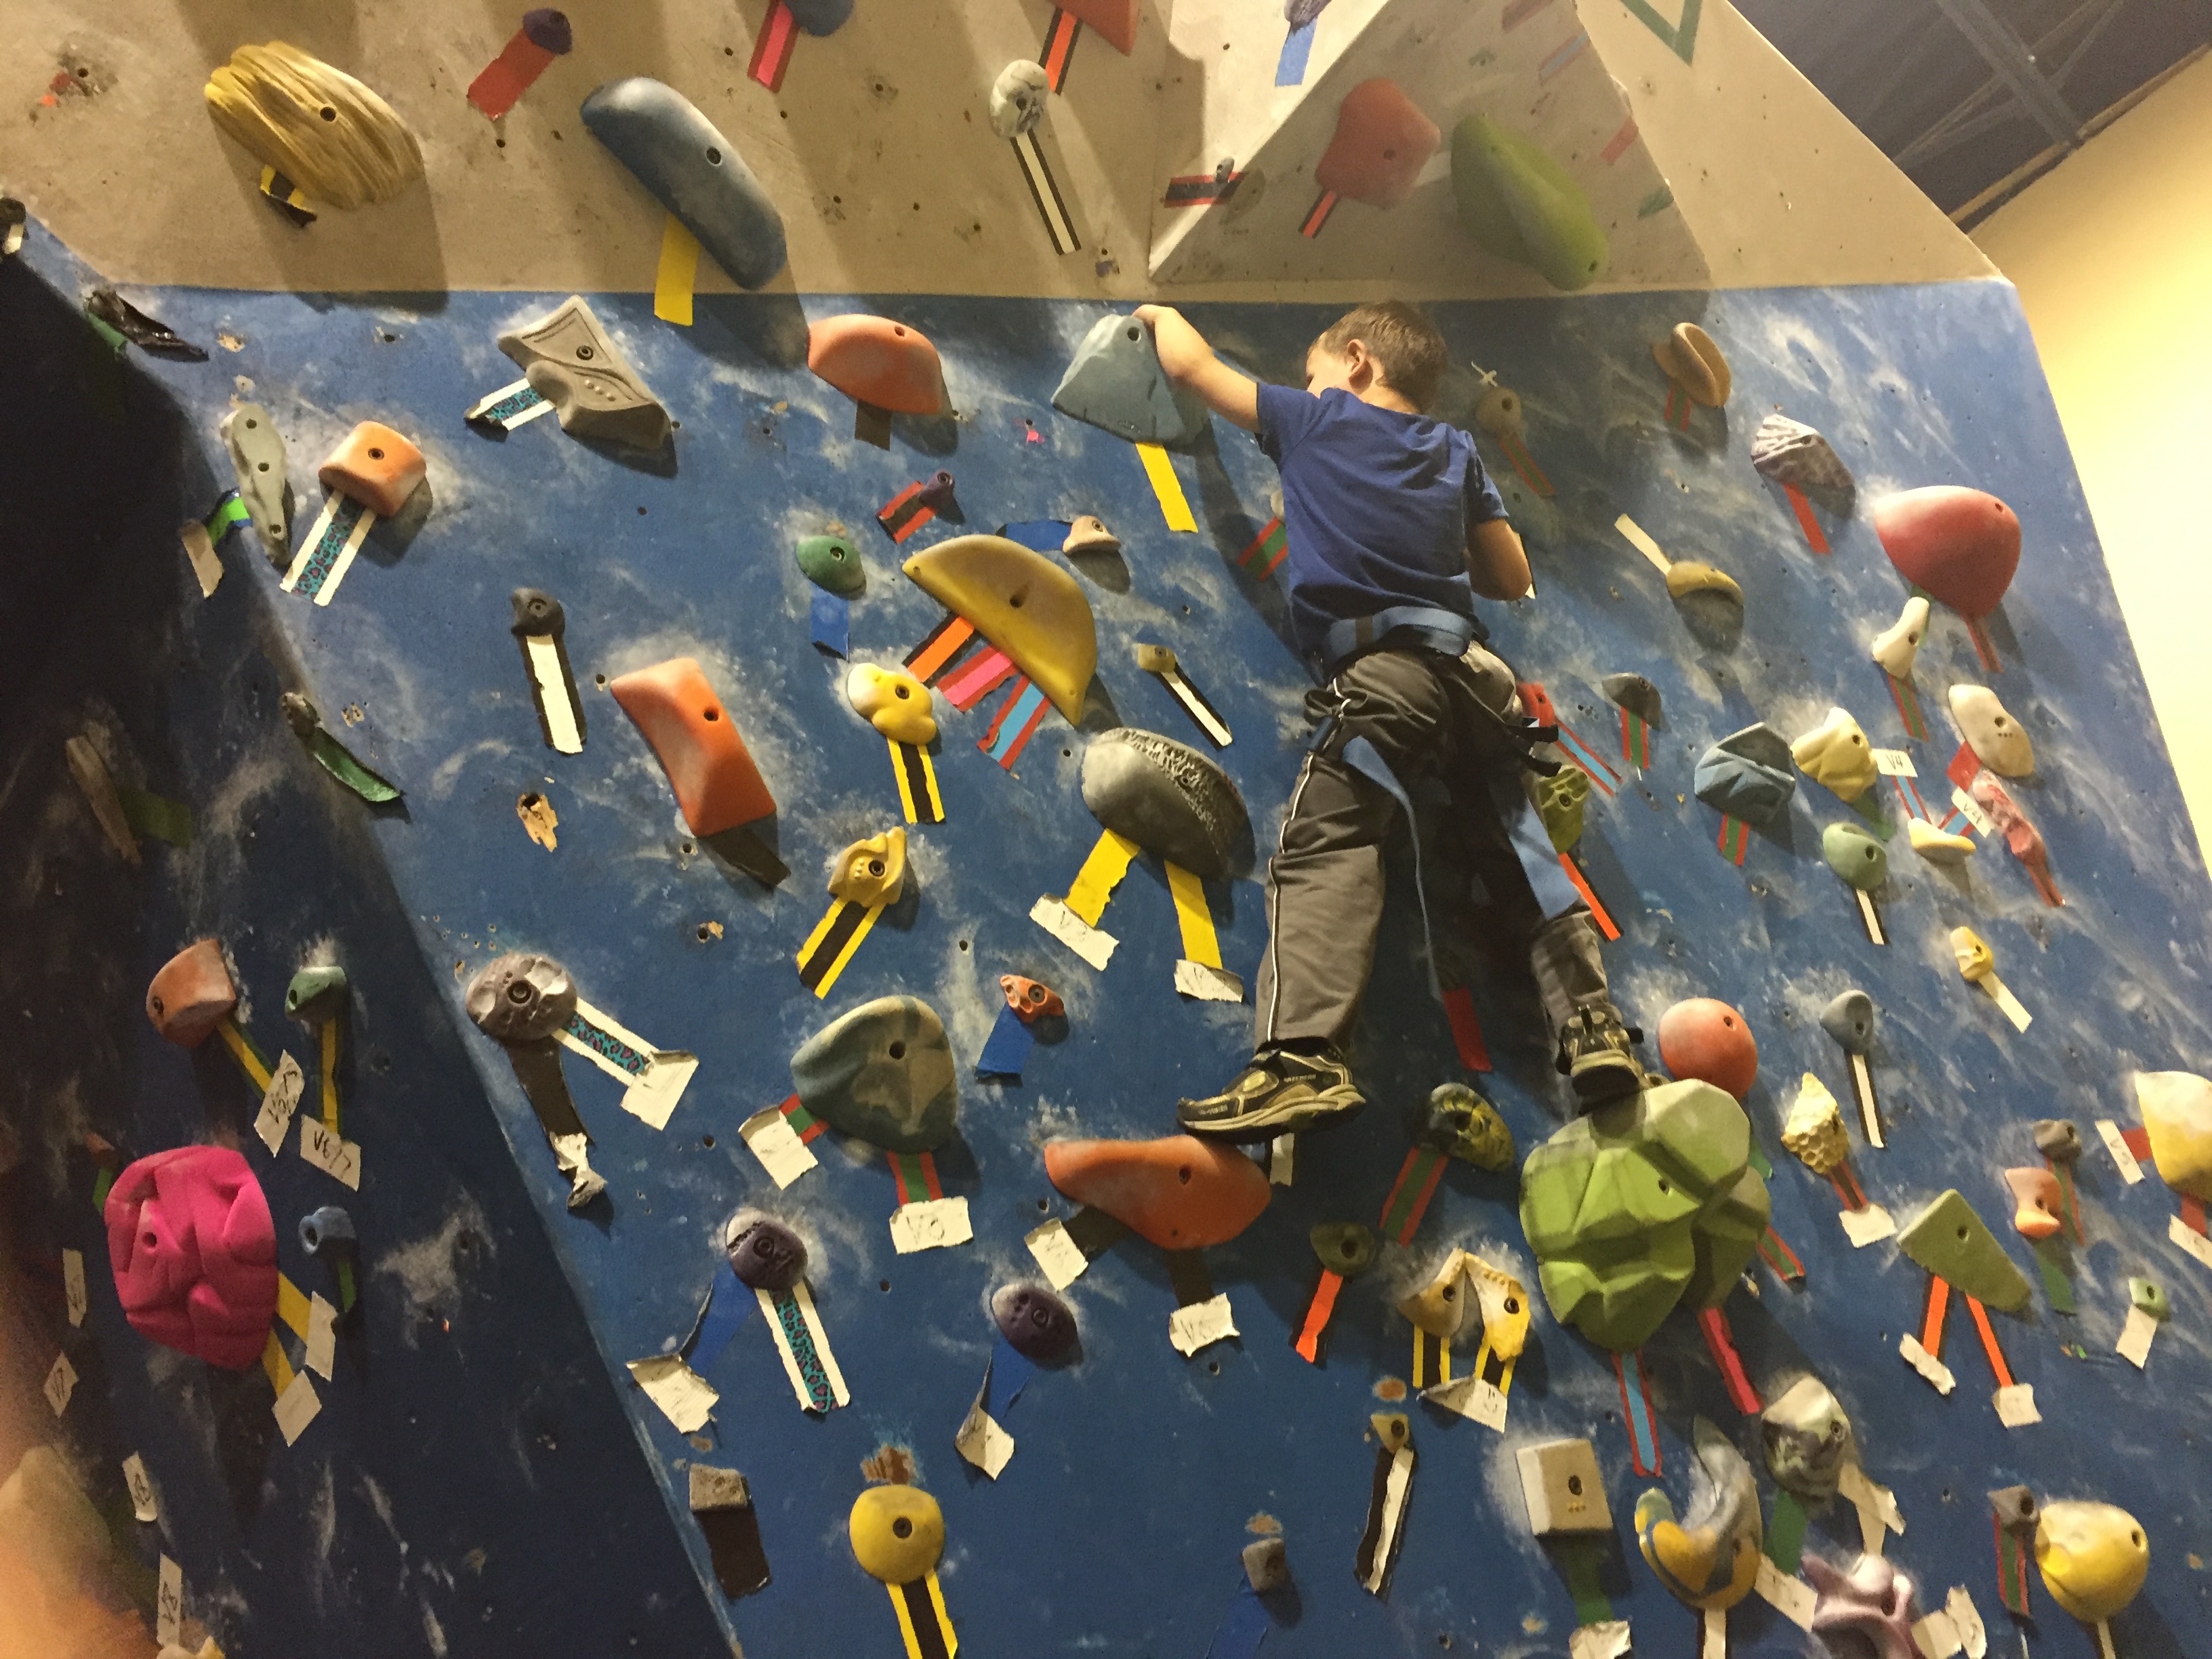 Boy Rock Climbing and Project Climbing in Abbotsford with #ExploreBCbyBus